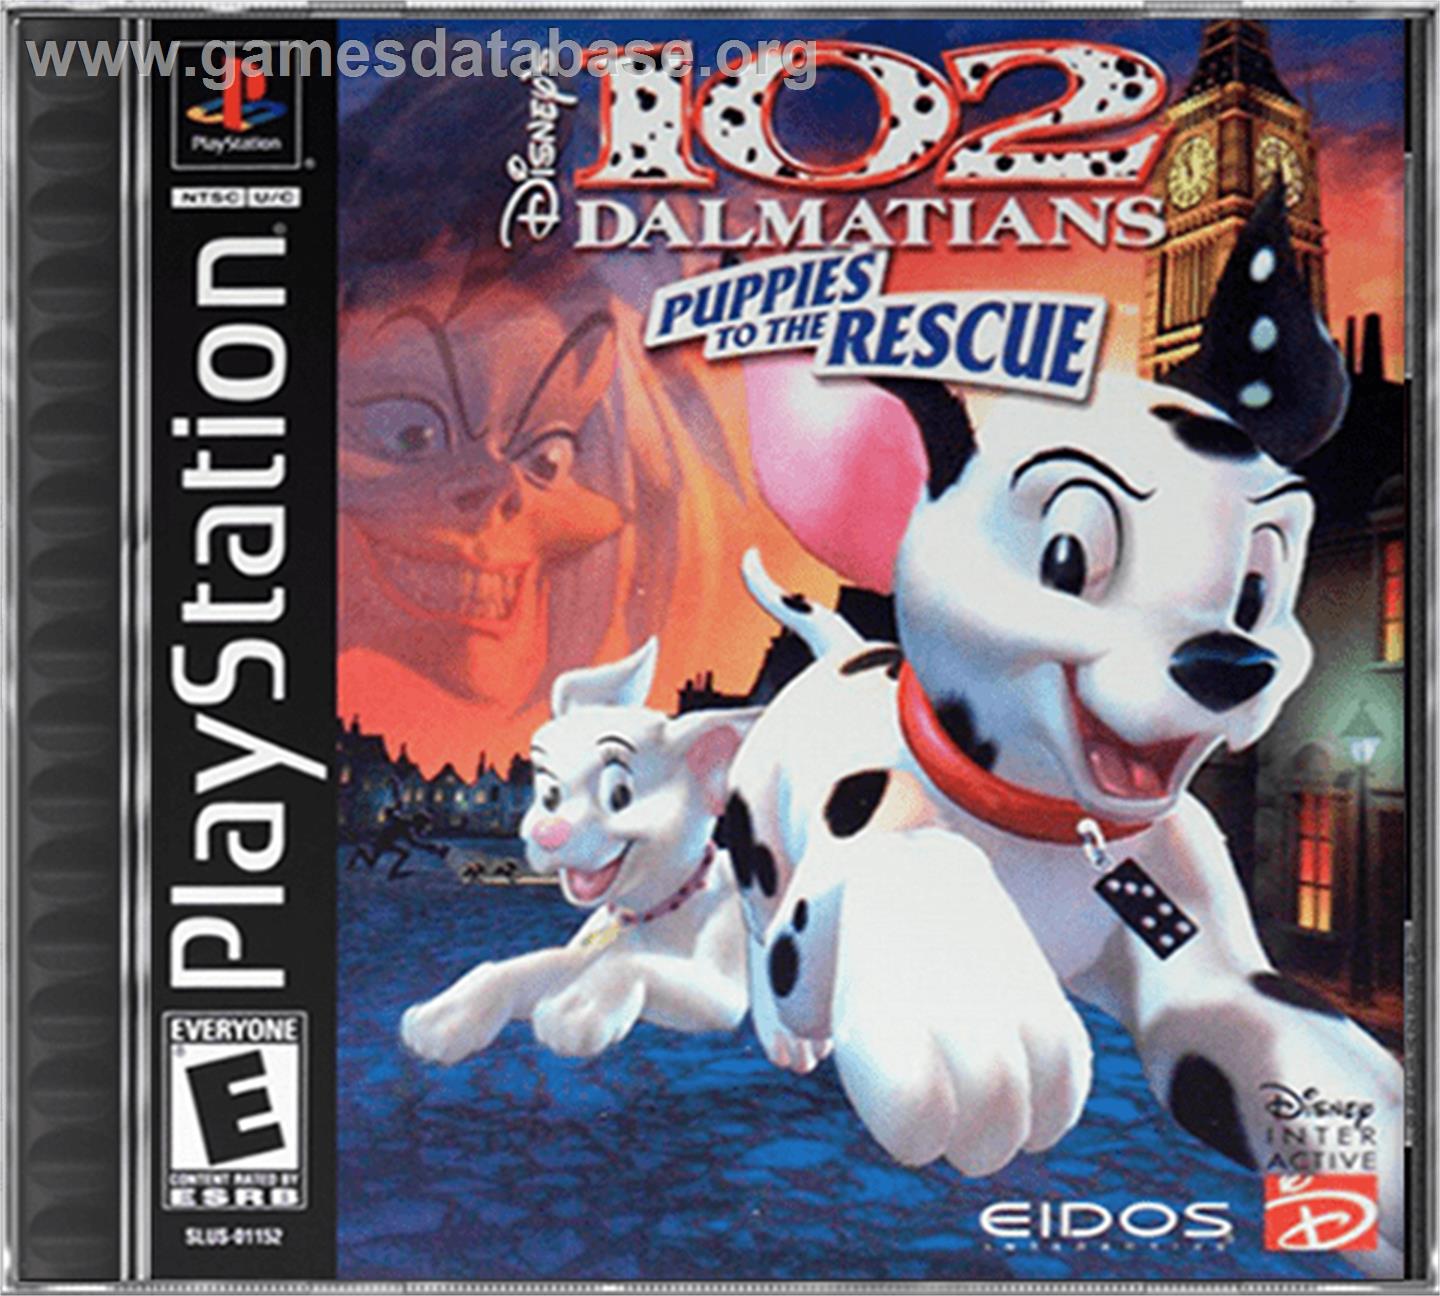 Disney's 102 Dalmatians: Puppies to the Rescue - Sony Playstation - Artwork - Box